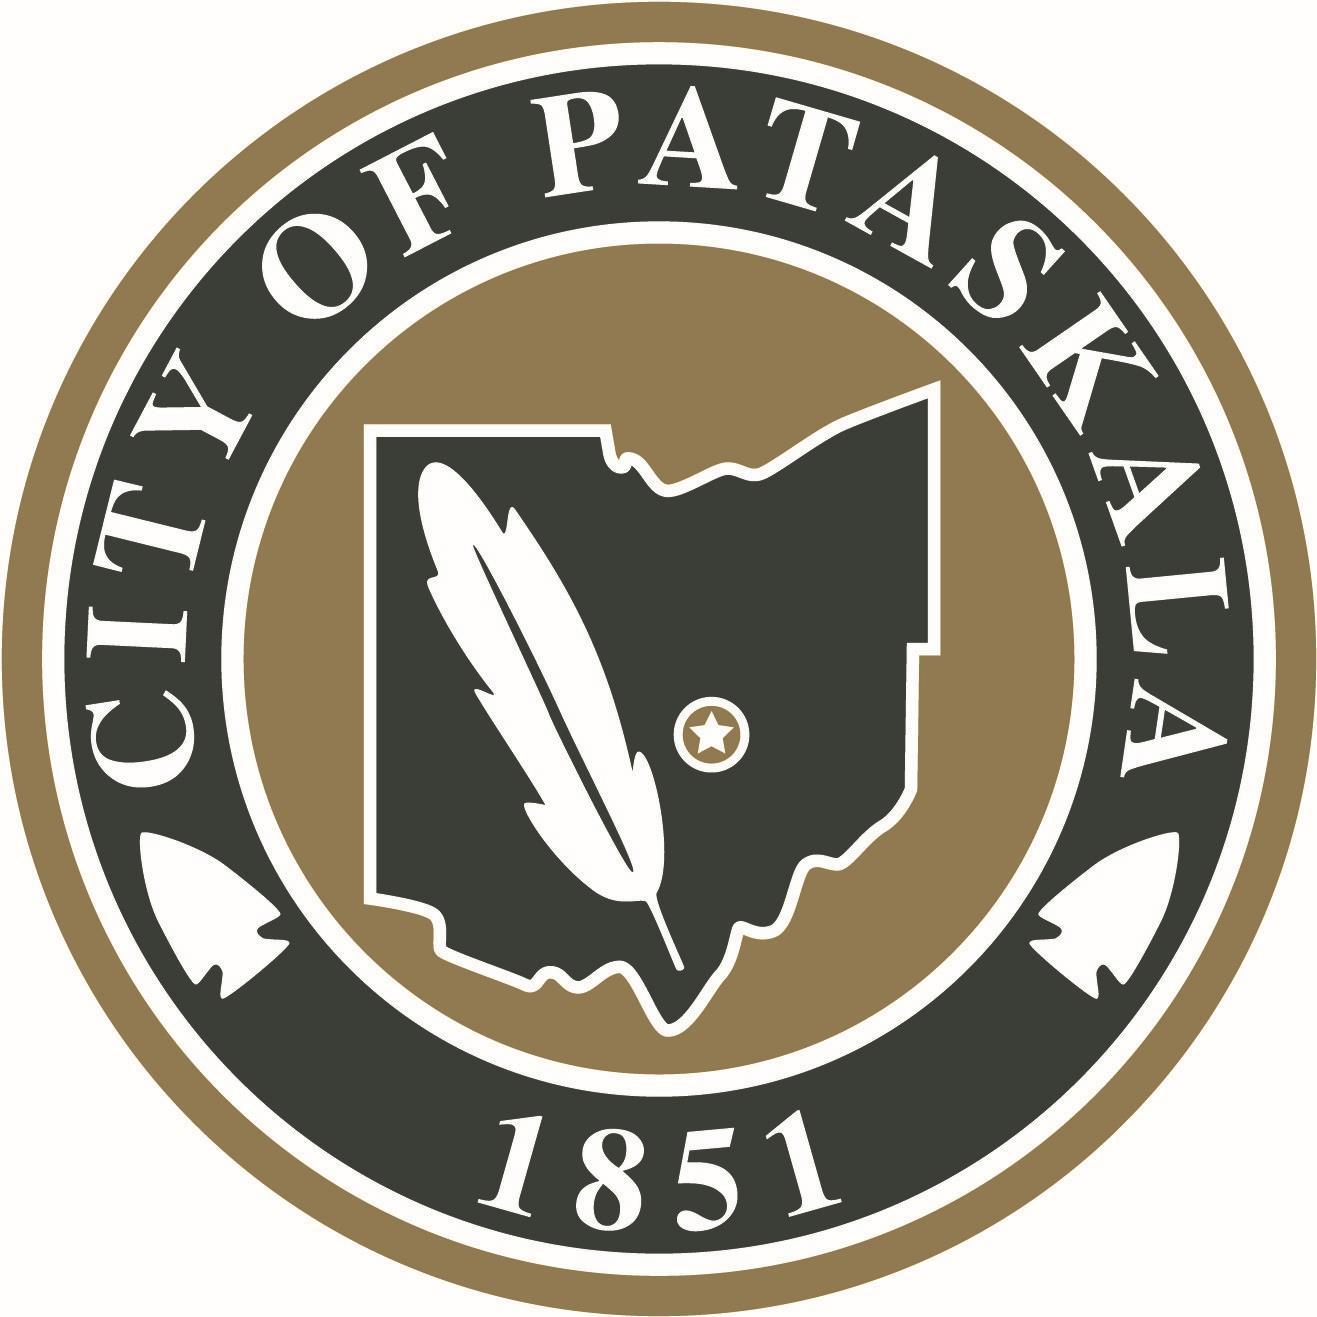 The official Twitter account for the City of Pataskala